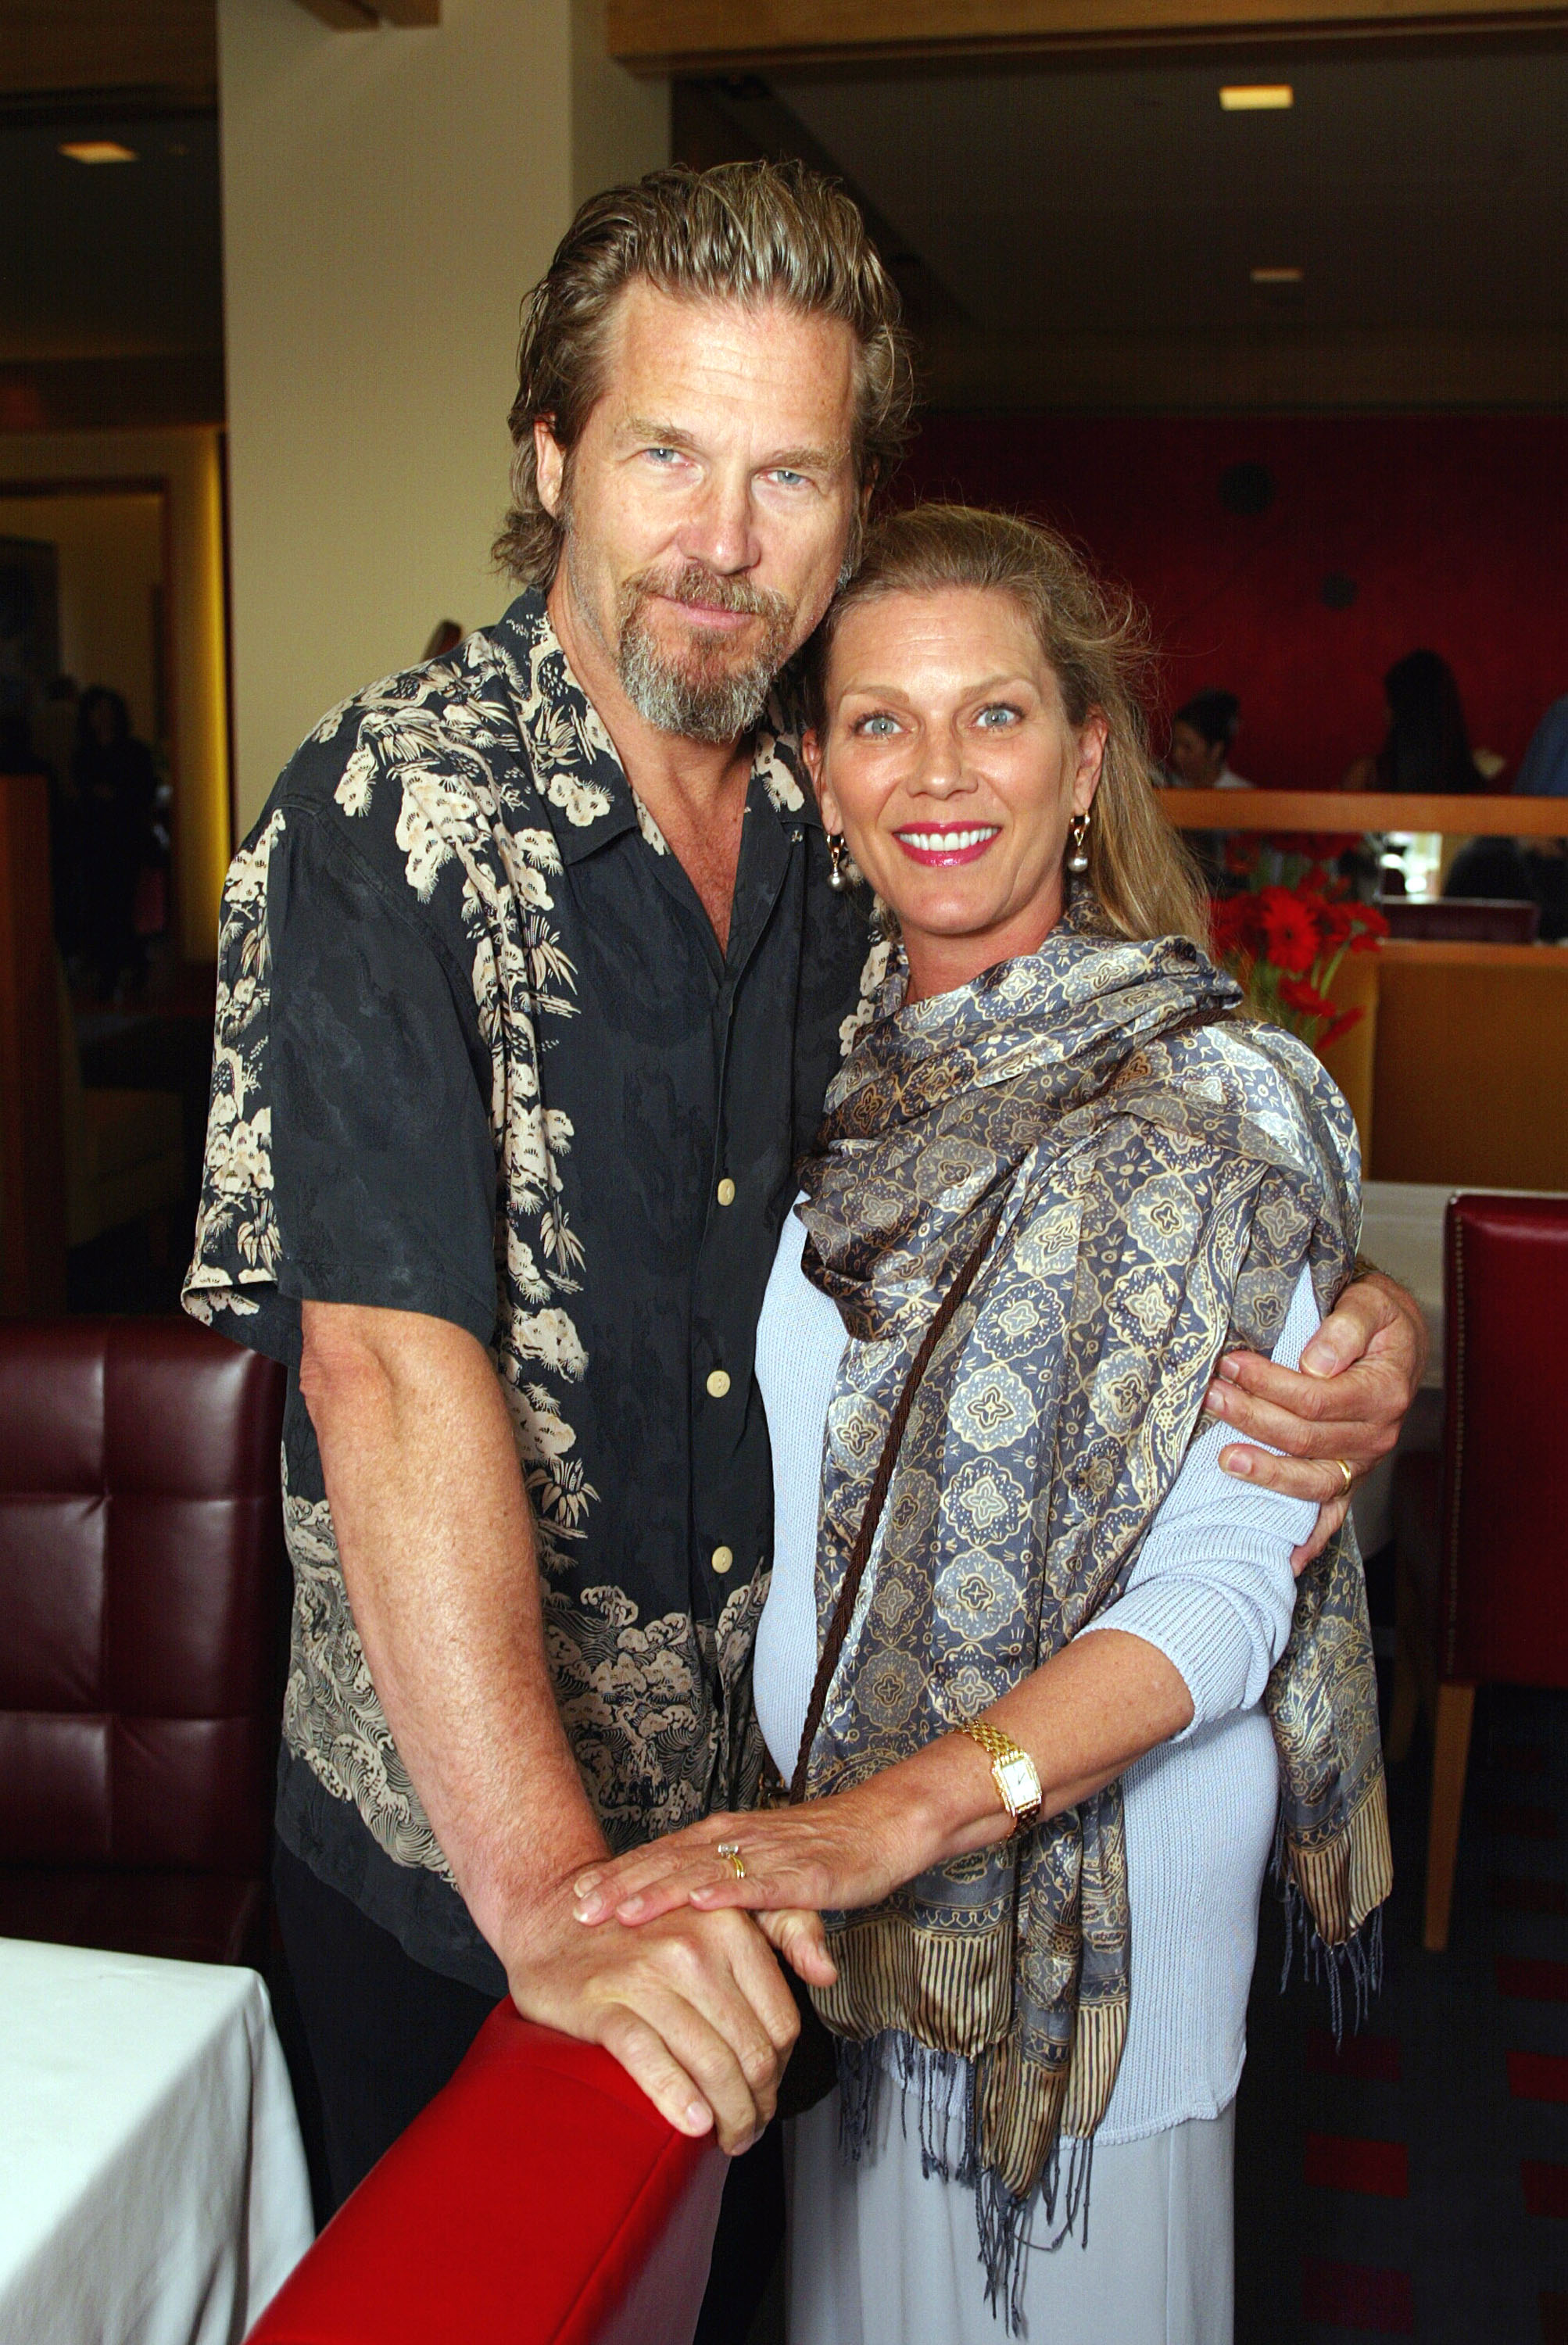 Susan and Jeff Bridges in California in 2002 | Source: Getty Images